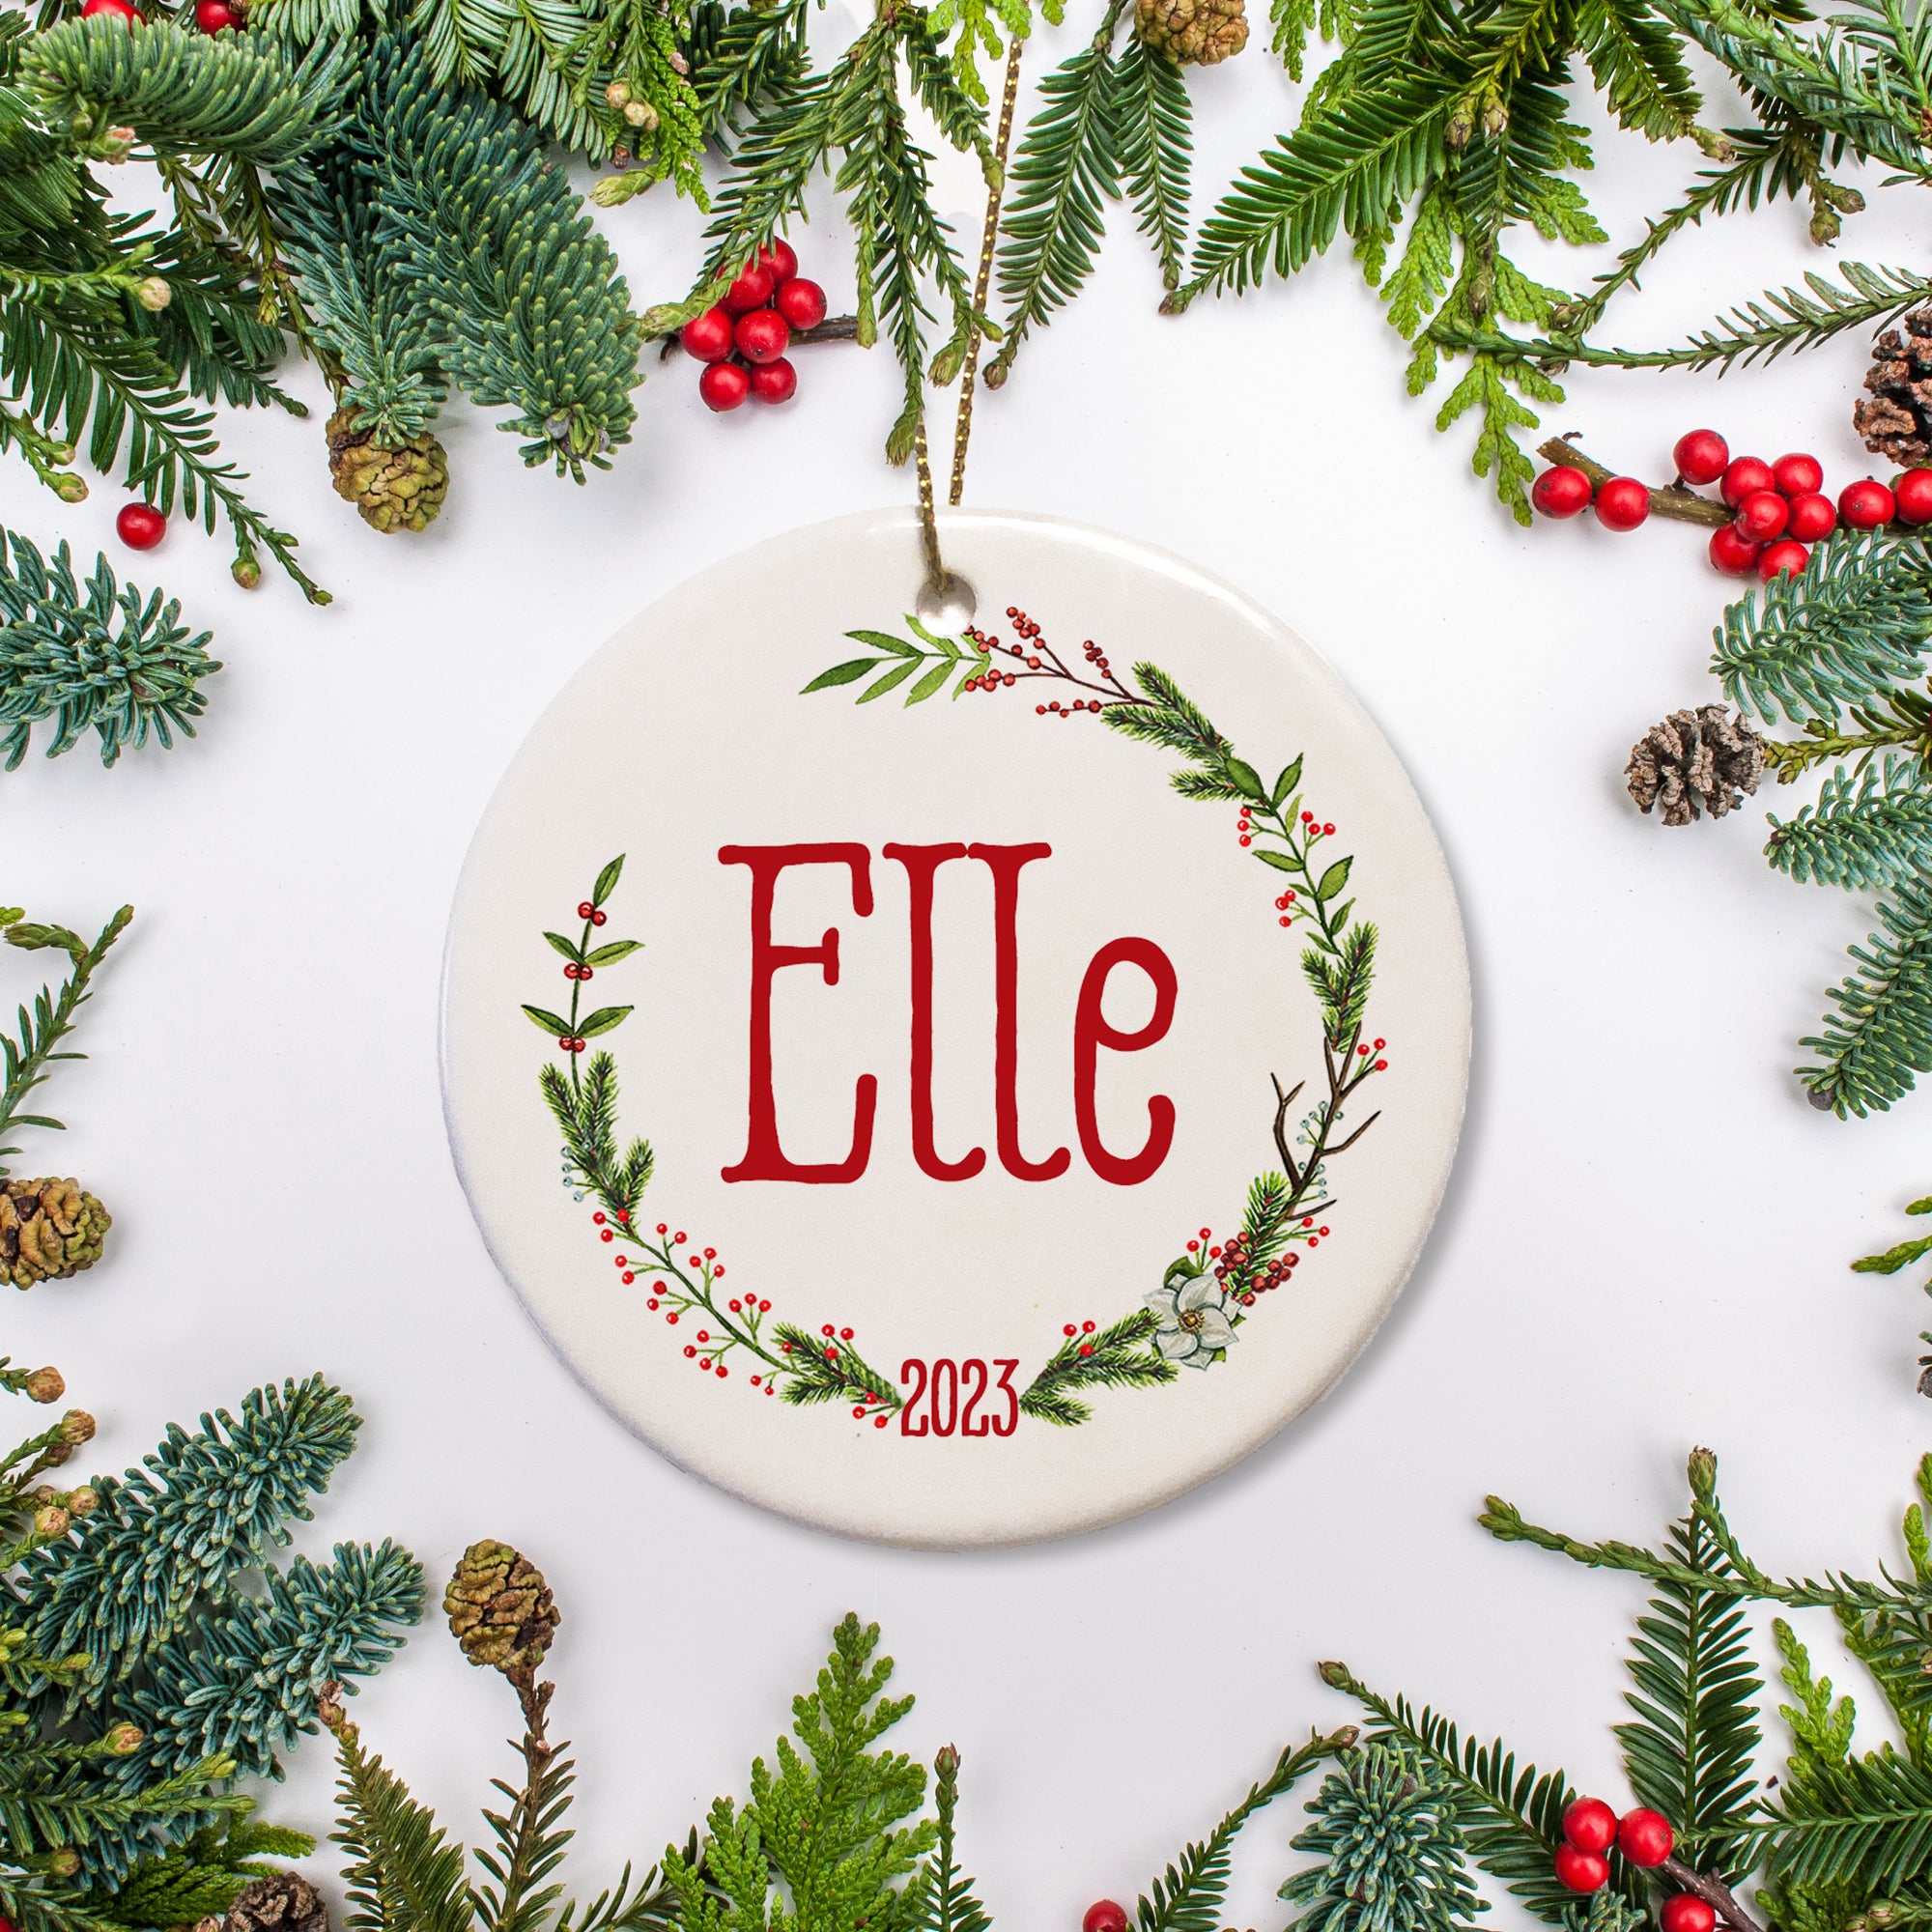 Personalized Christmas ornament with a holiday open wreath. Name written in big red letters and the year featured at the bottom of the wreath. Add name and year of your choice